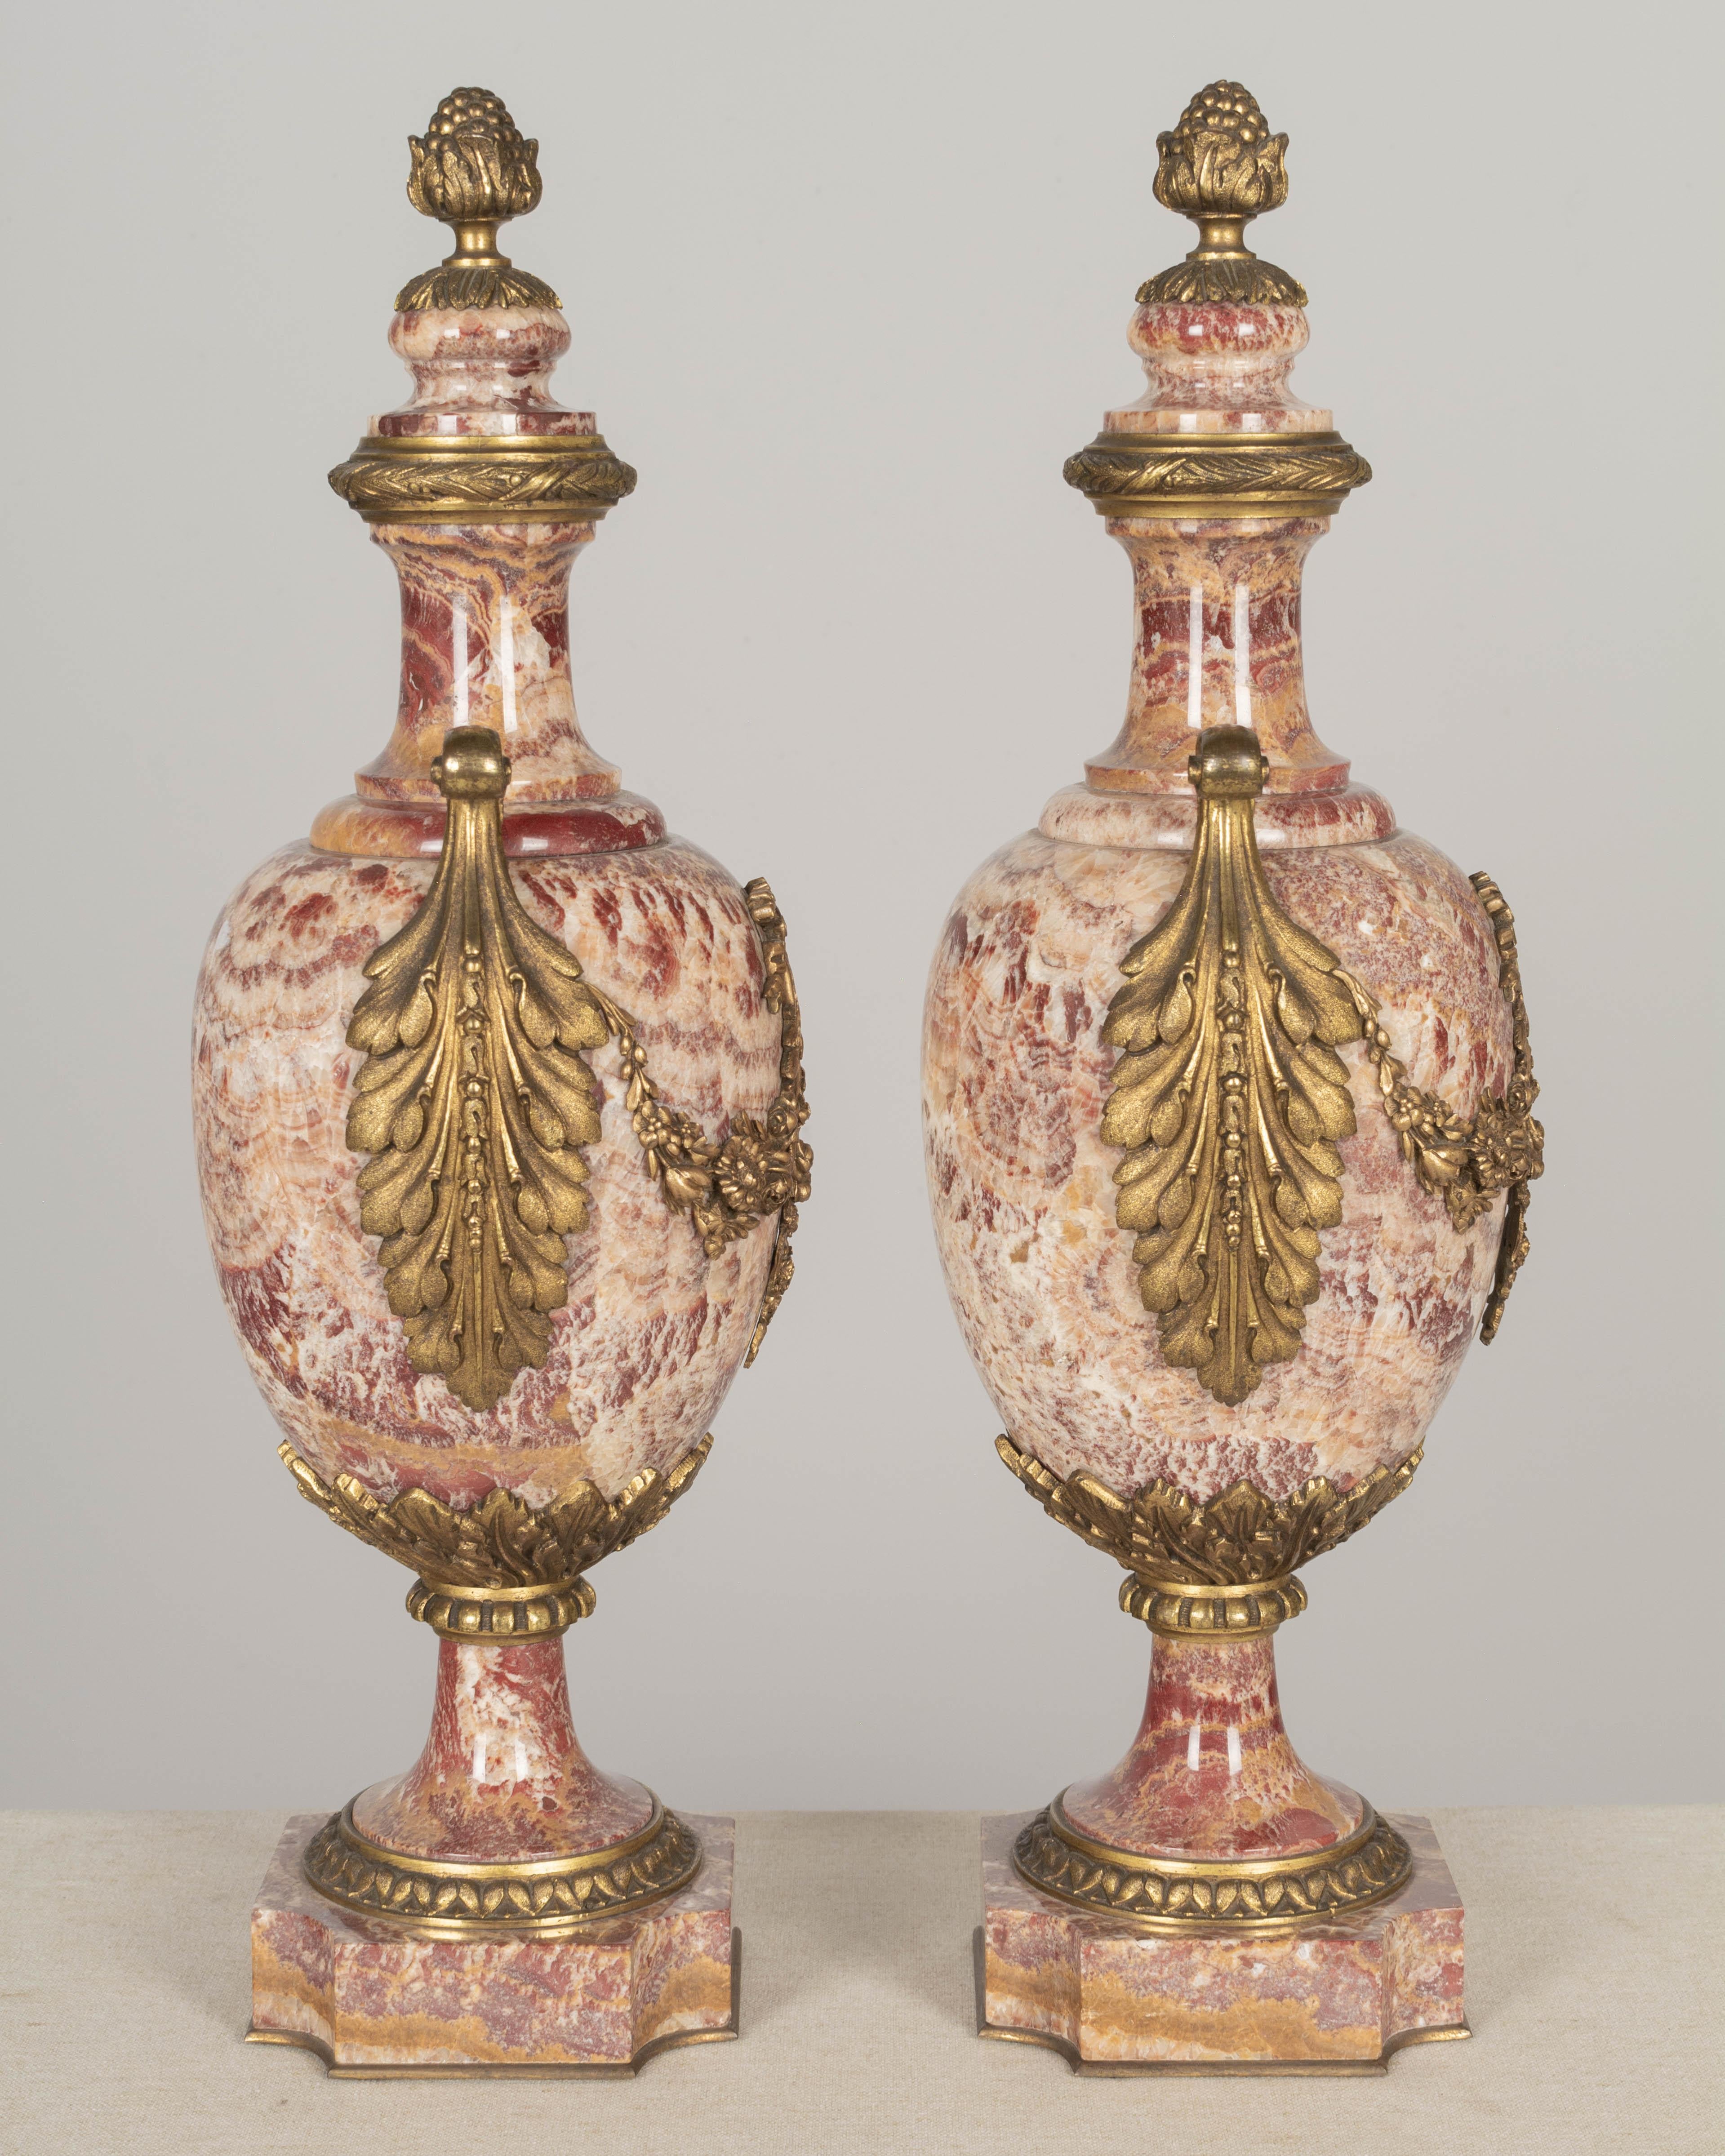 19th Century French Marble and Bronze Cassolette Urns Pair In Good Condition For Sale In Winter Park, FL